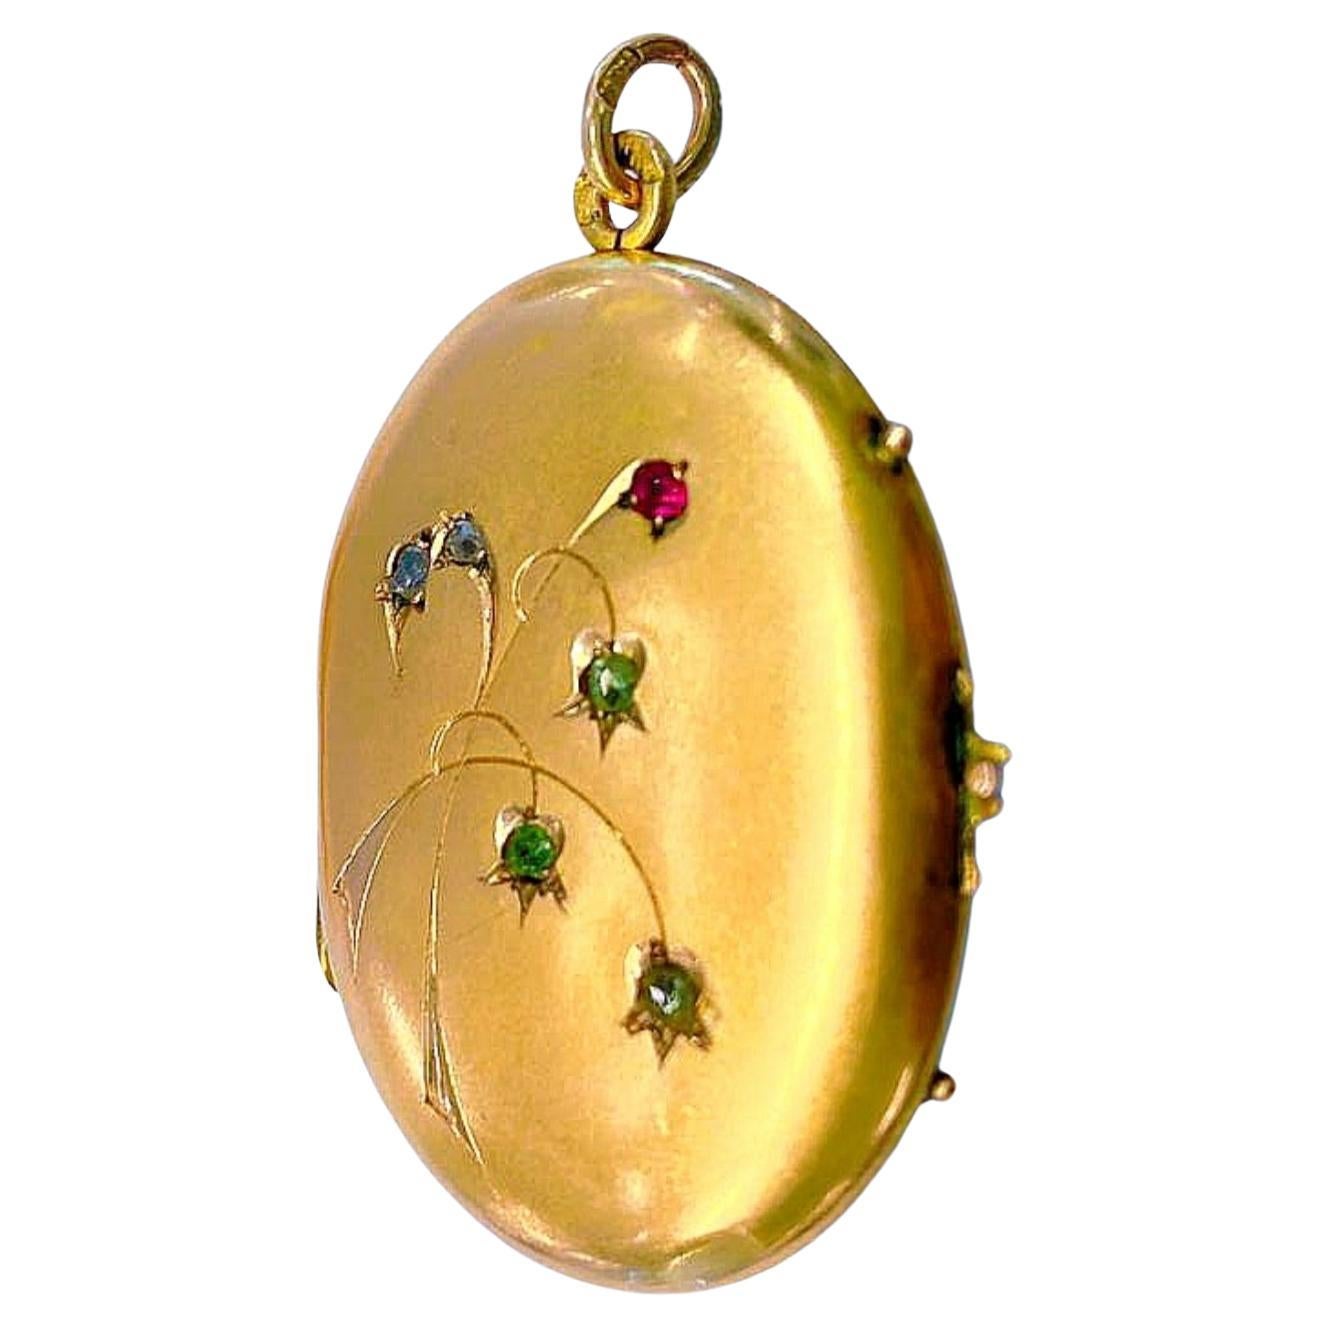 Antique 14k gold russian locket pendant engraved on front with art nouveau style flower with green demantoid stones and rose cut diamonds and ruby pendant is hall marked 56 imperial russian gold standard and initial maker mark in cyrillic alphabet